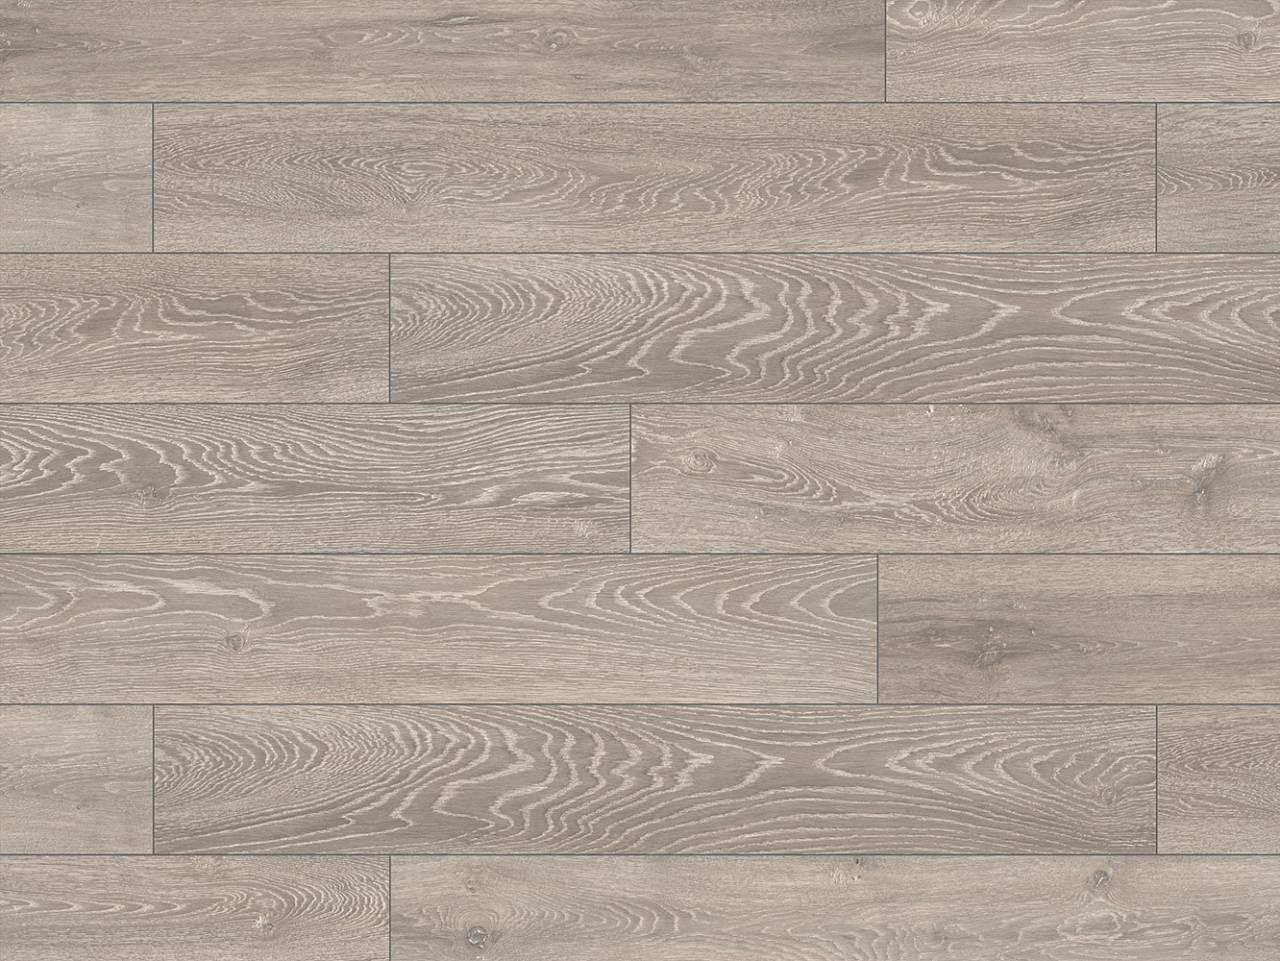 Detailed close-up of 5542 Boulder Oak, highlighting its natural wood grain and texture.